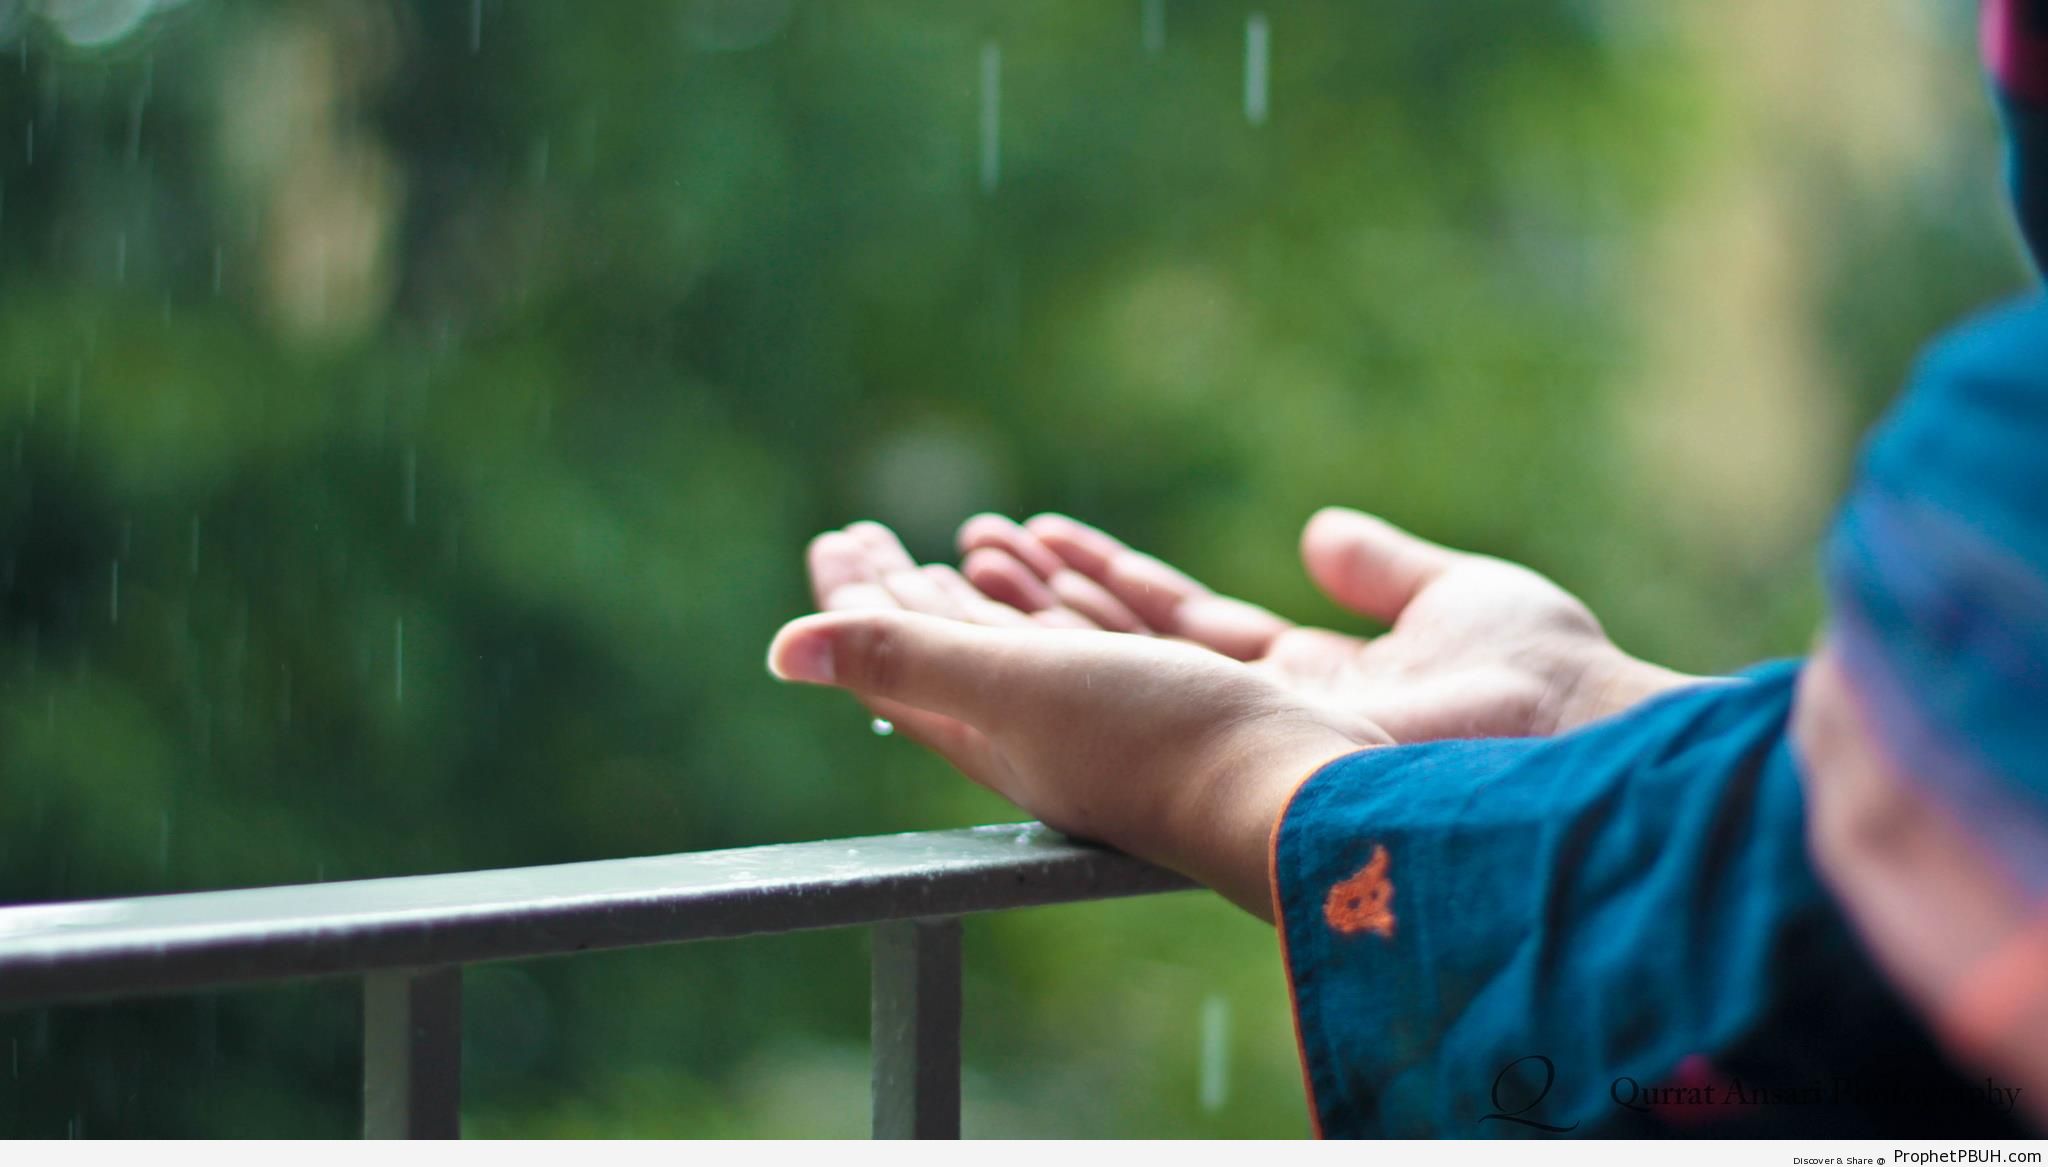 Dua in the Rain - Photos of Hands -Pictures